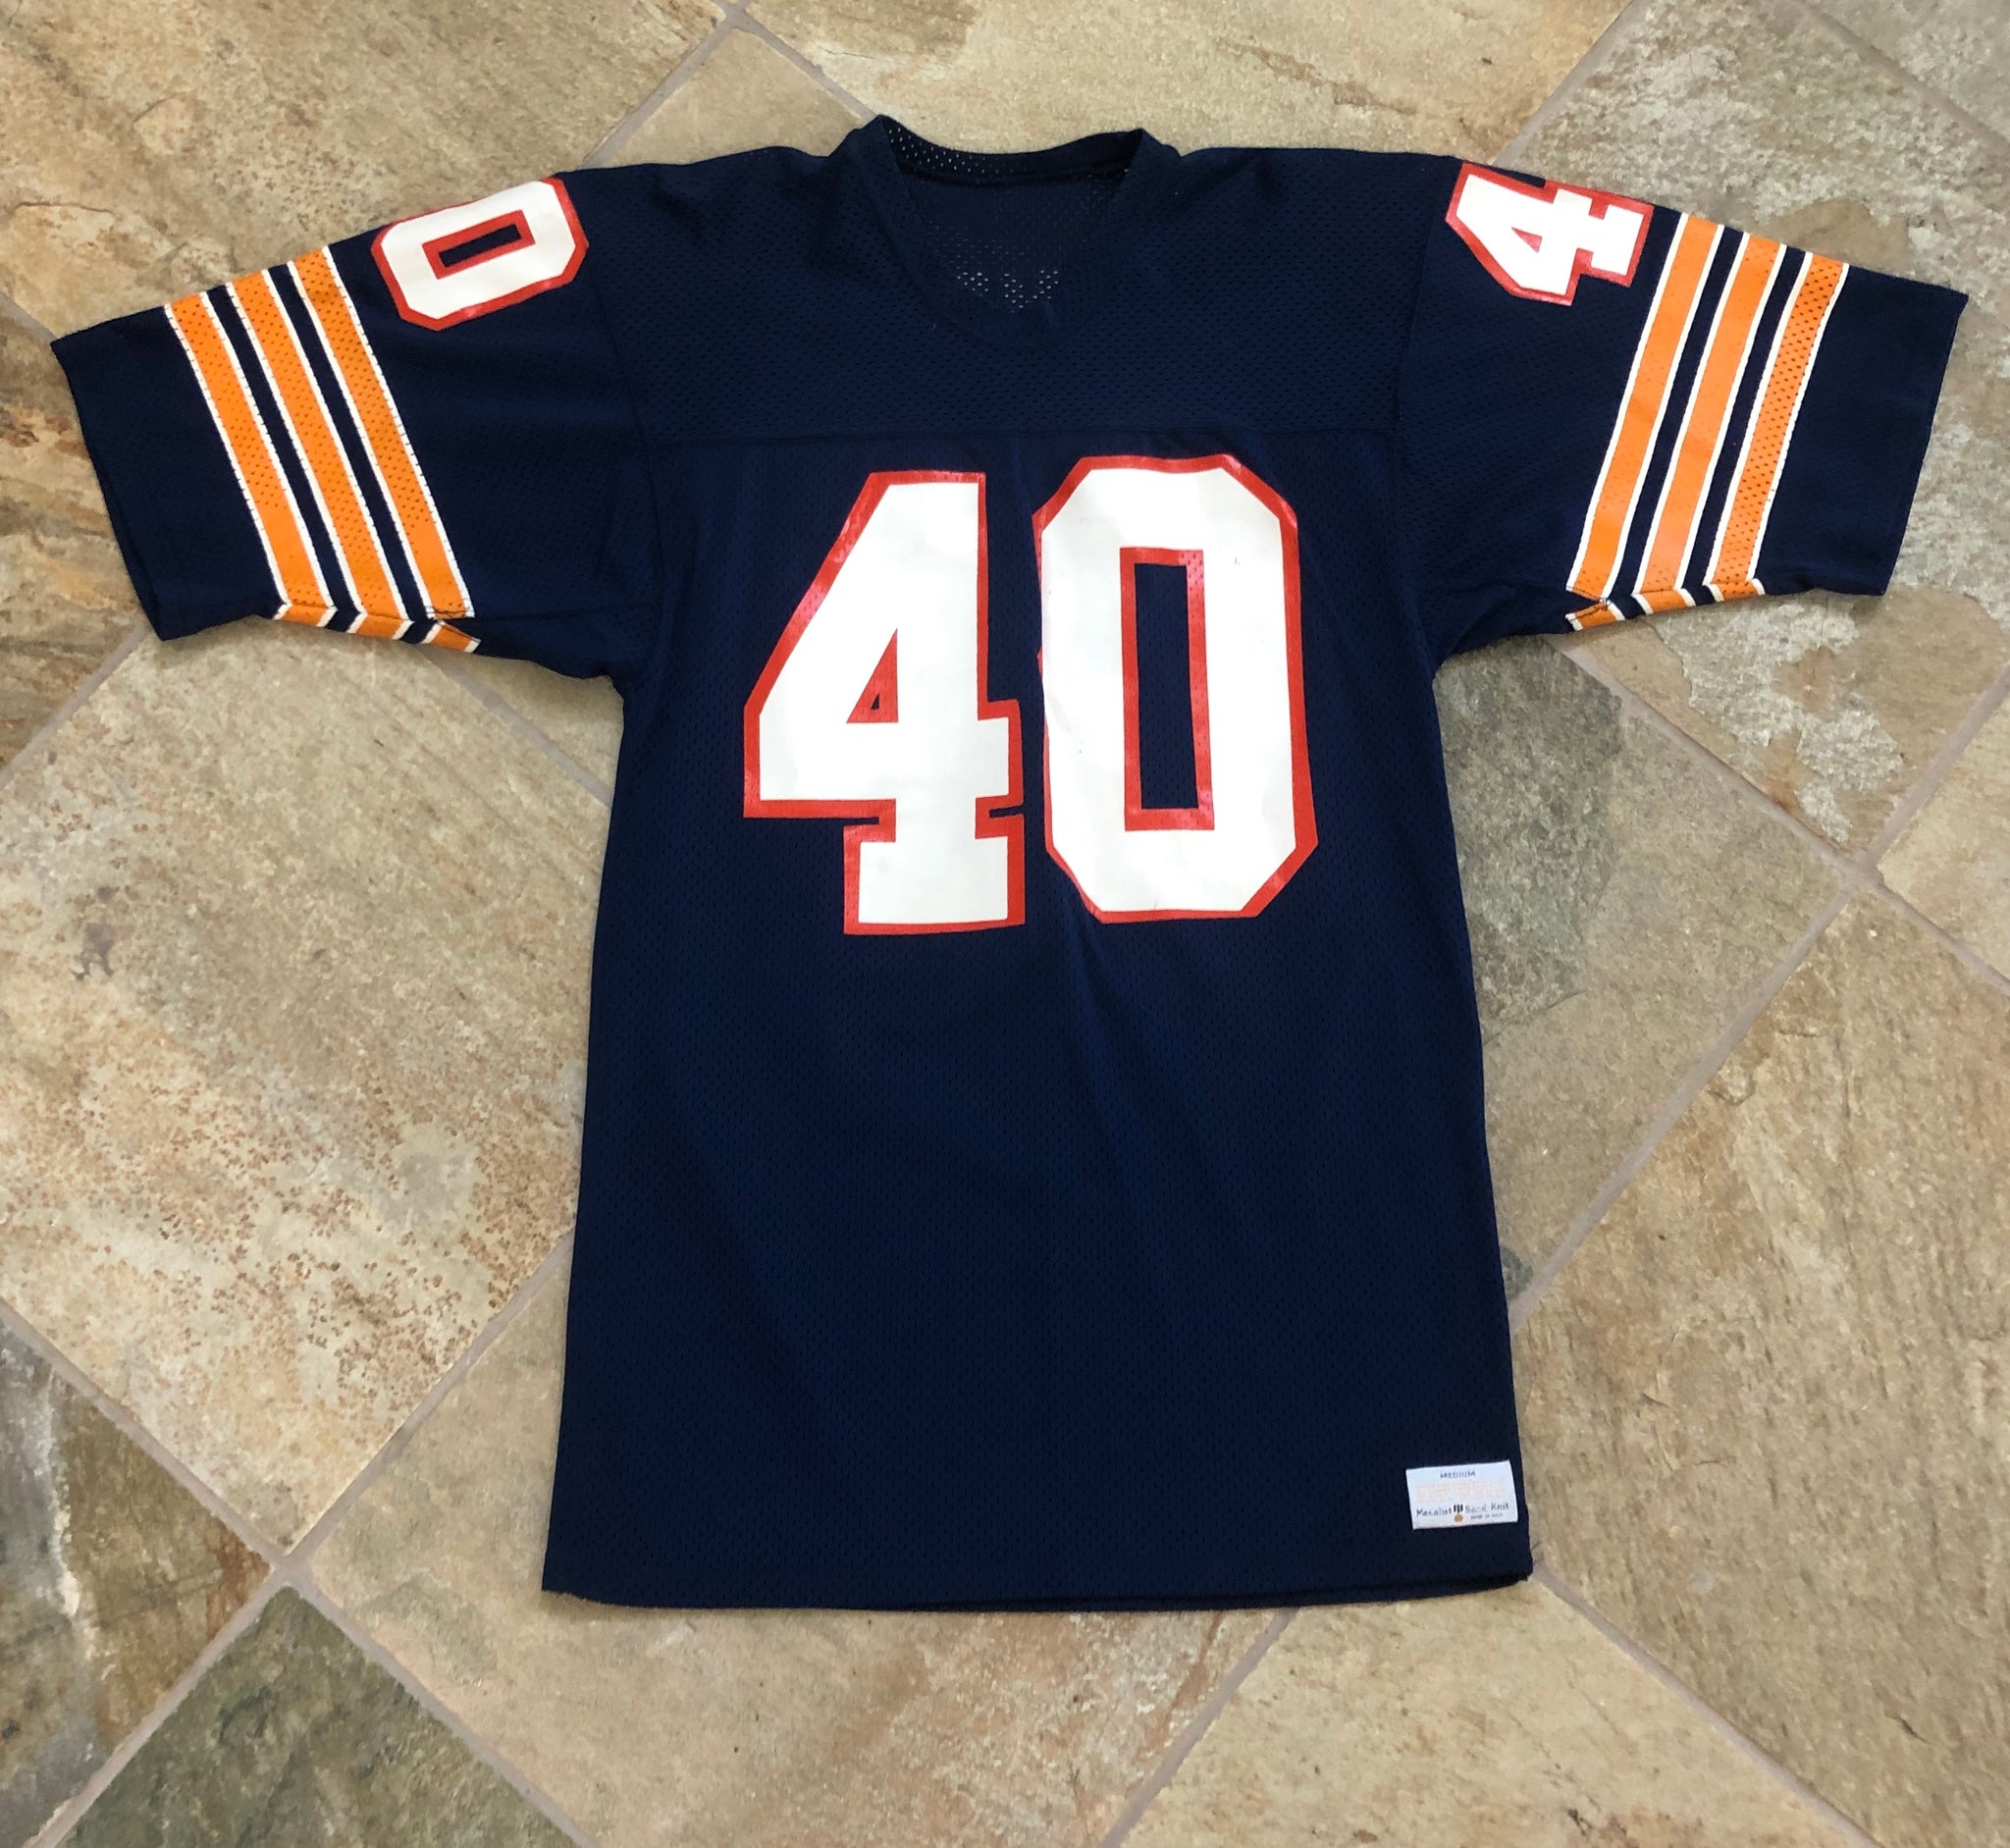 gale sayers jersey